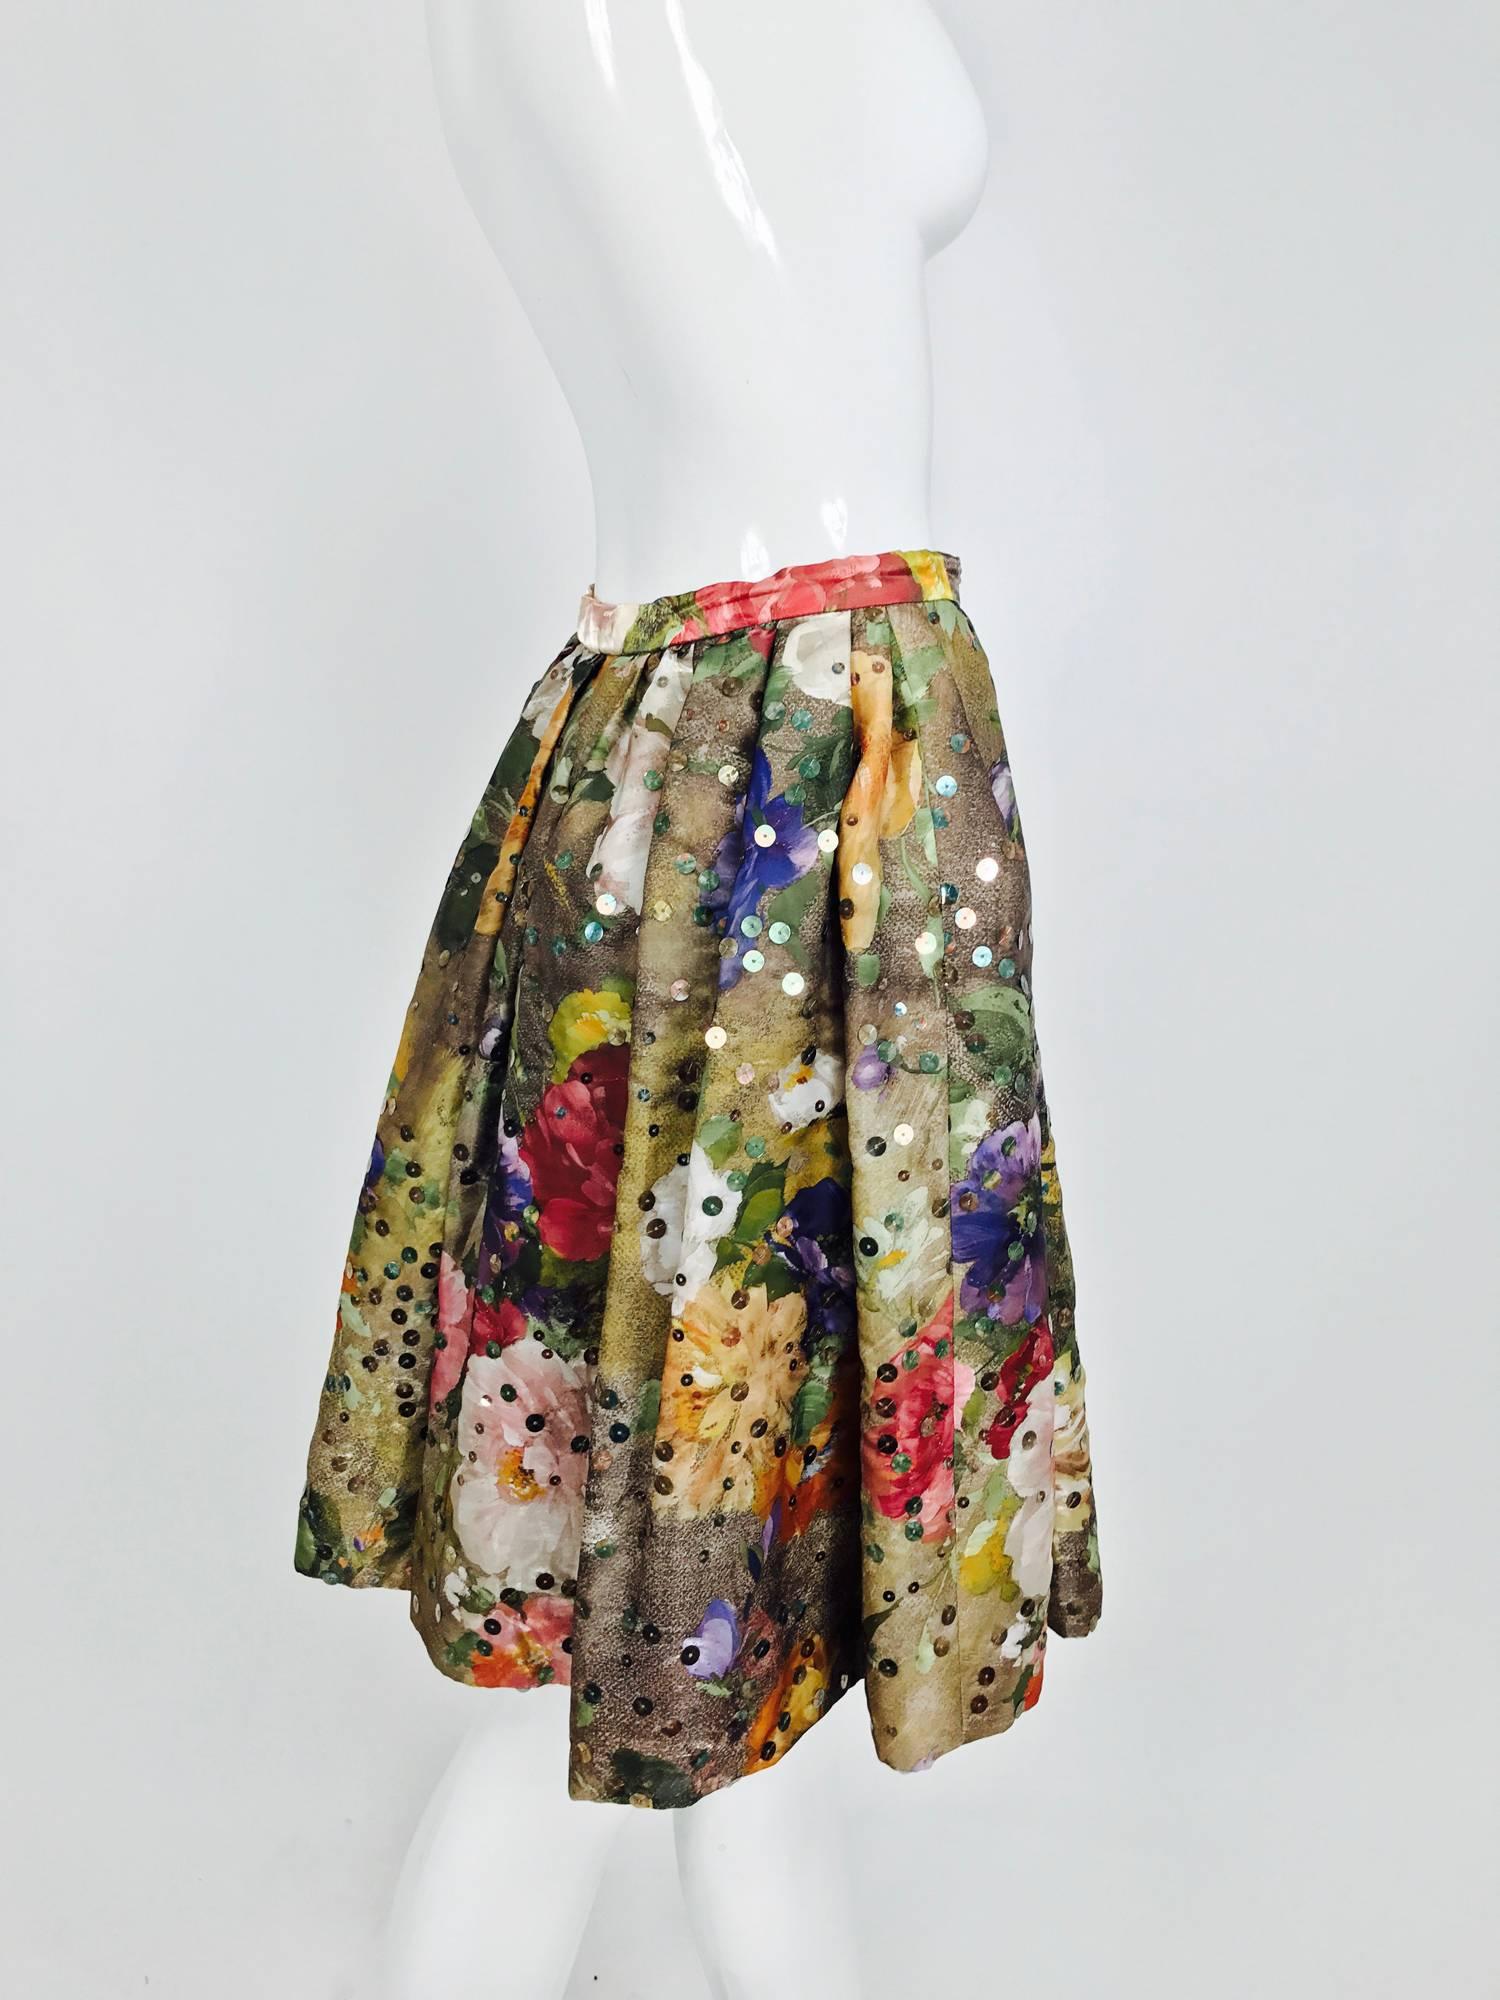 Vintage Christian LaCroix sequined floral satin open pleated skirt 1980s 2